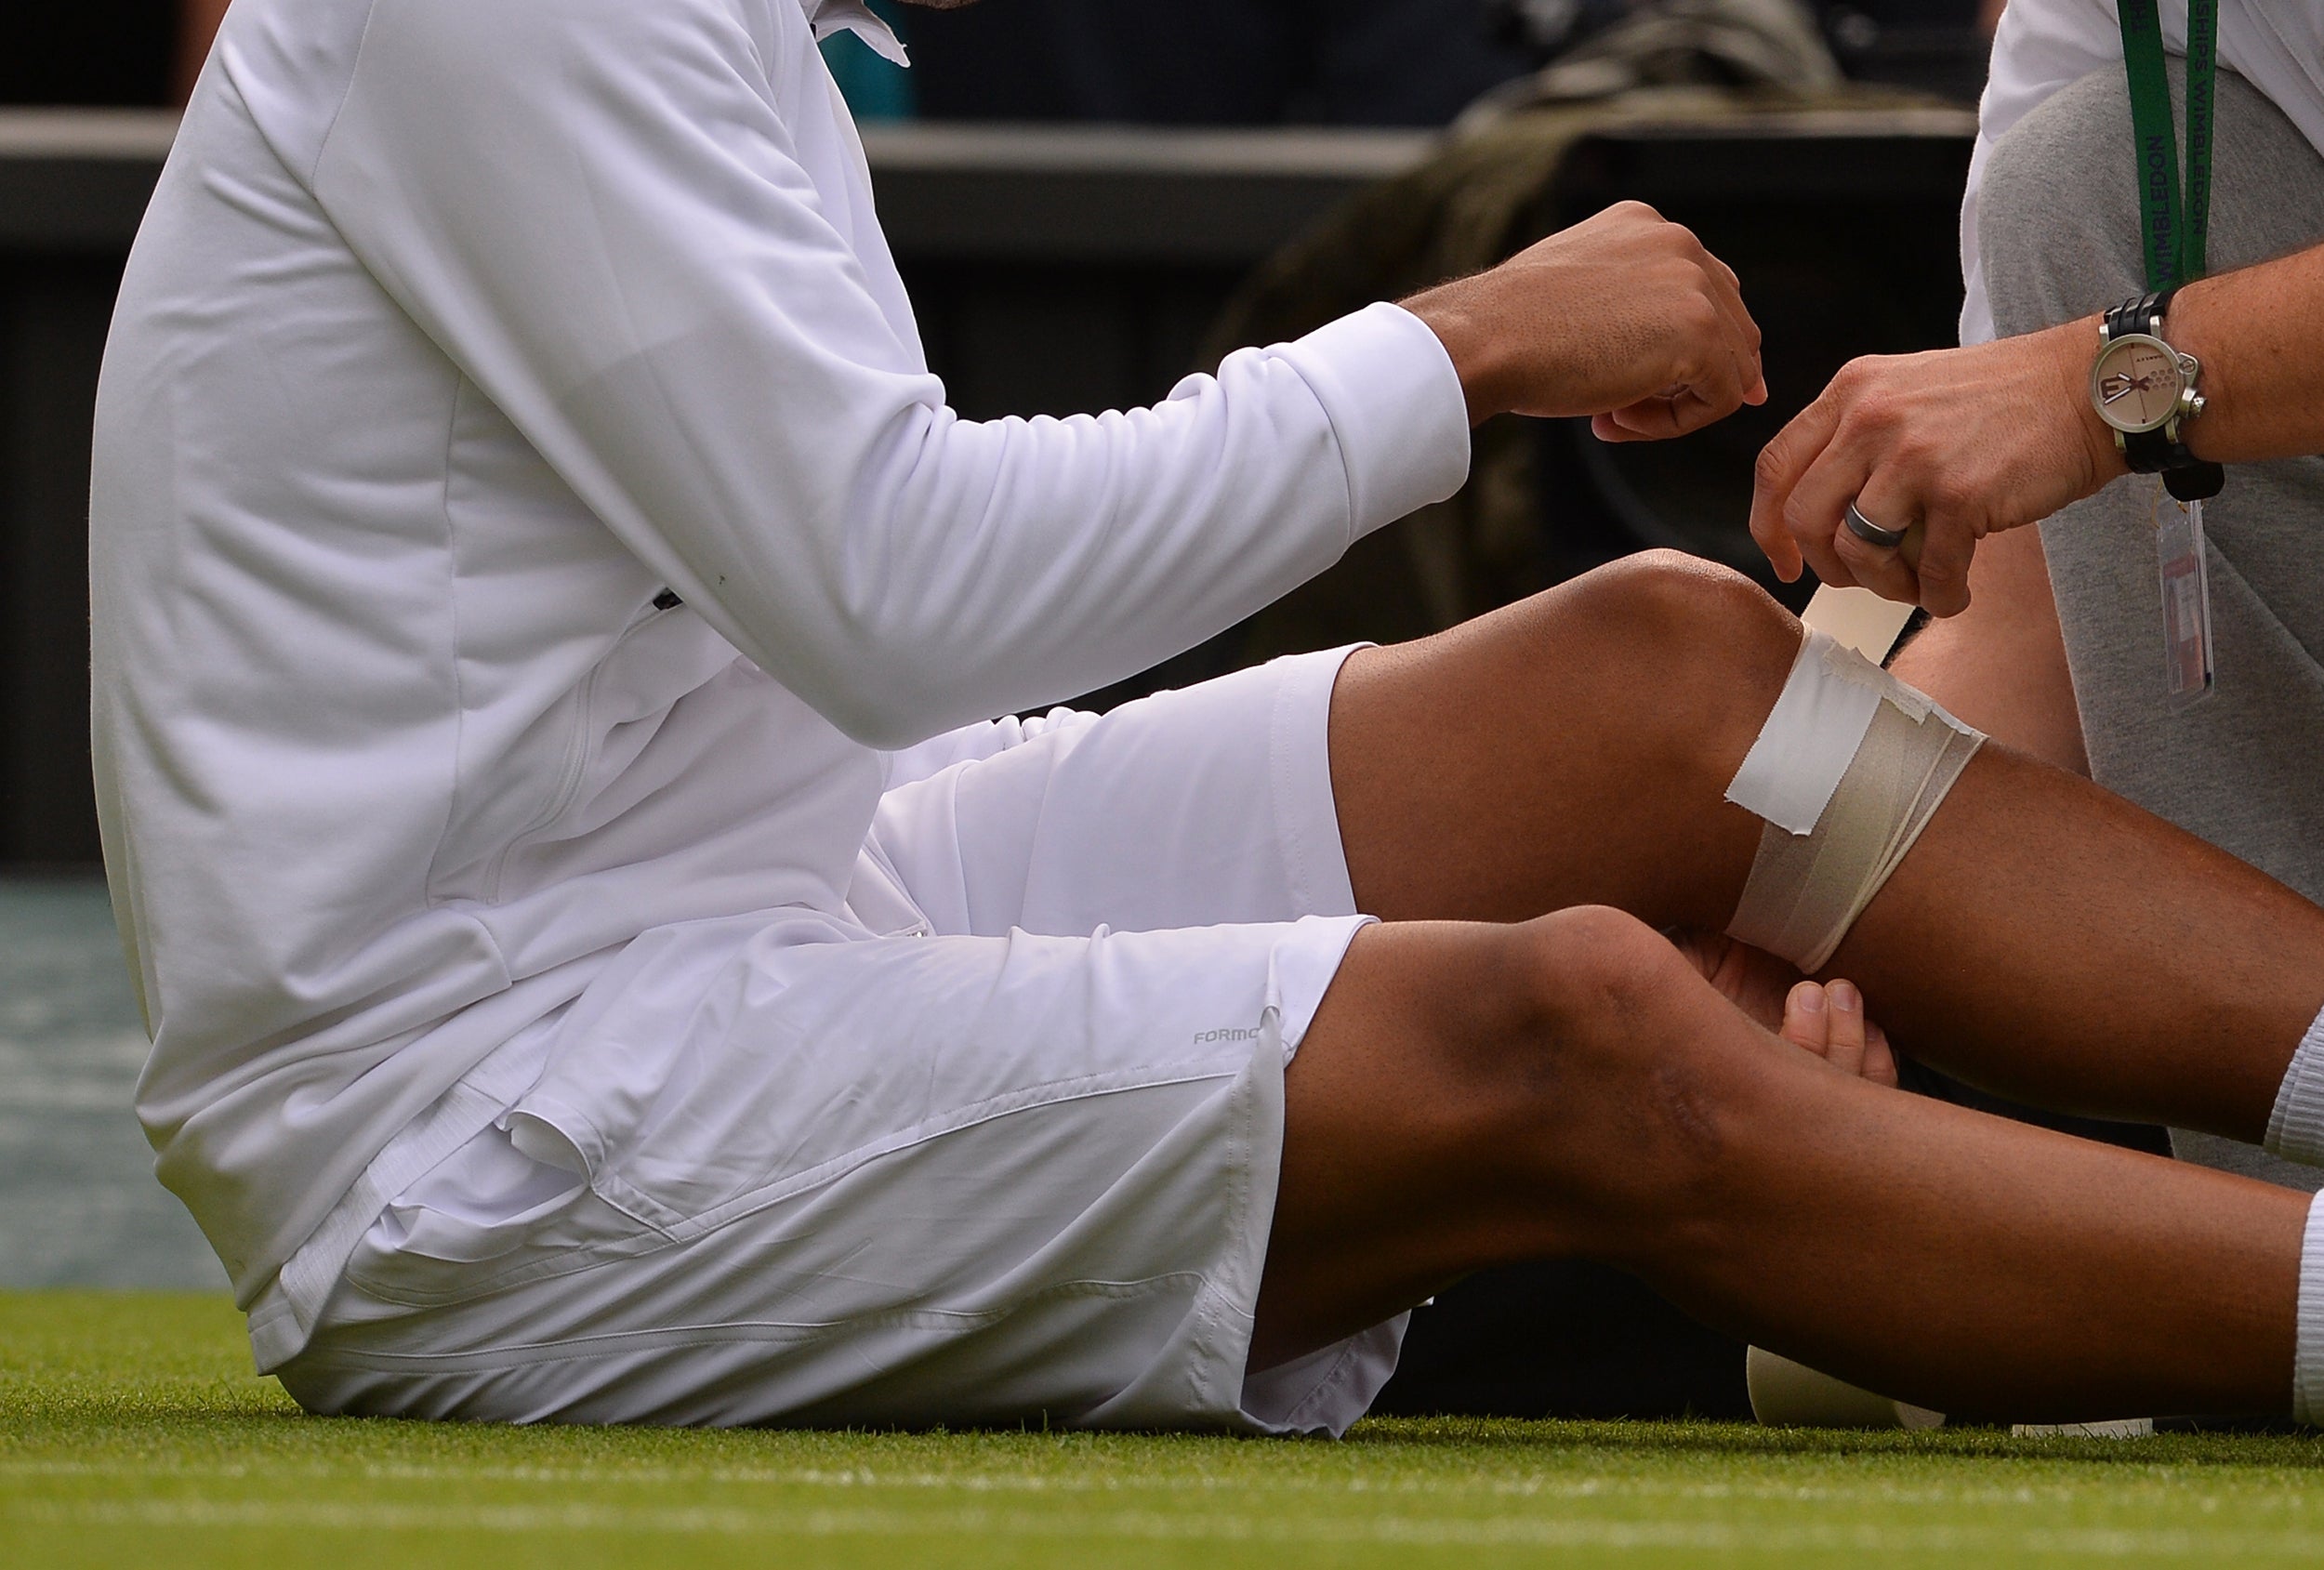 France’s Jo-Wilfried Tsonga receives attention to his leg during the Wimbldeon tournament in 2013 (AFP/Getty)